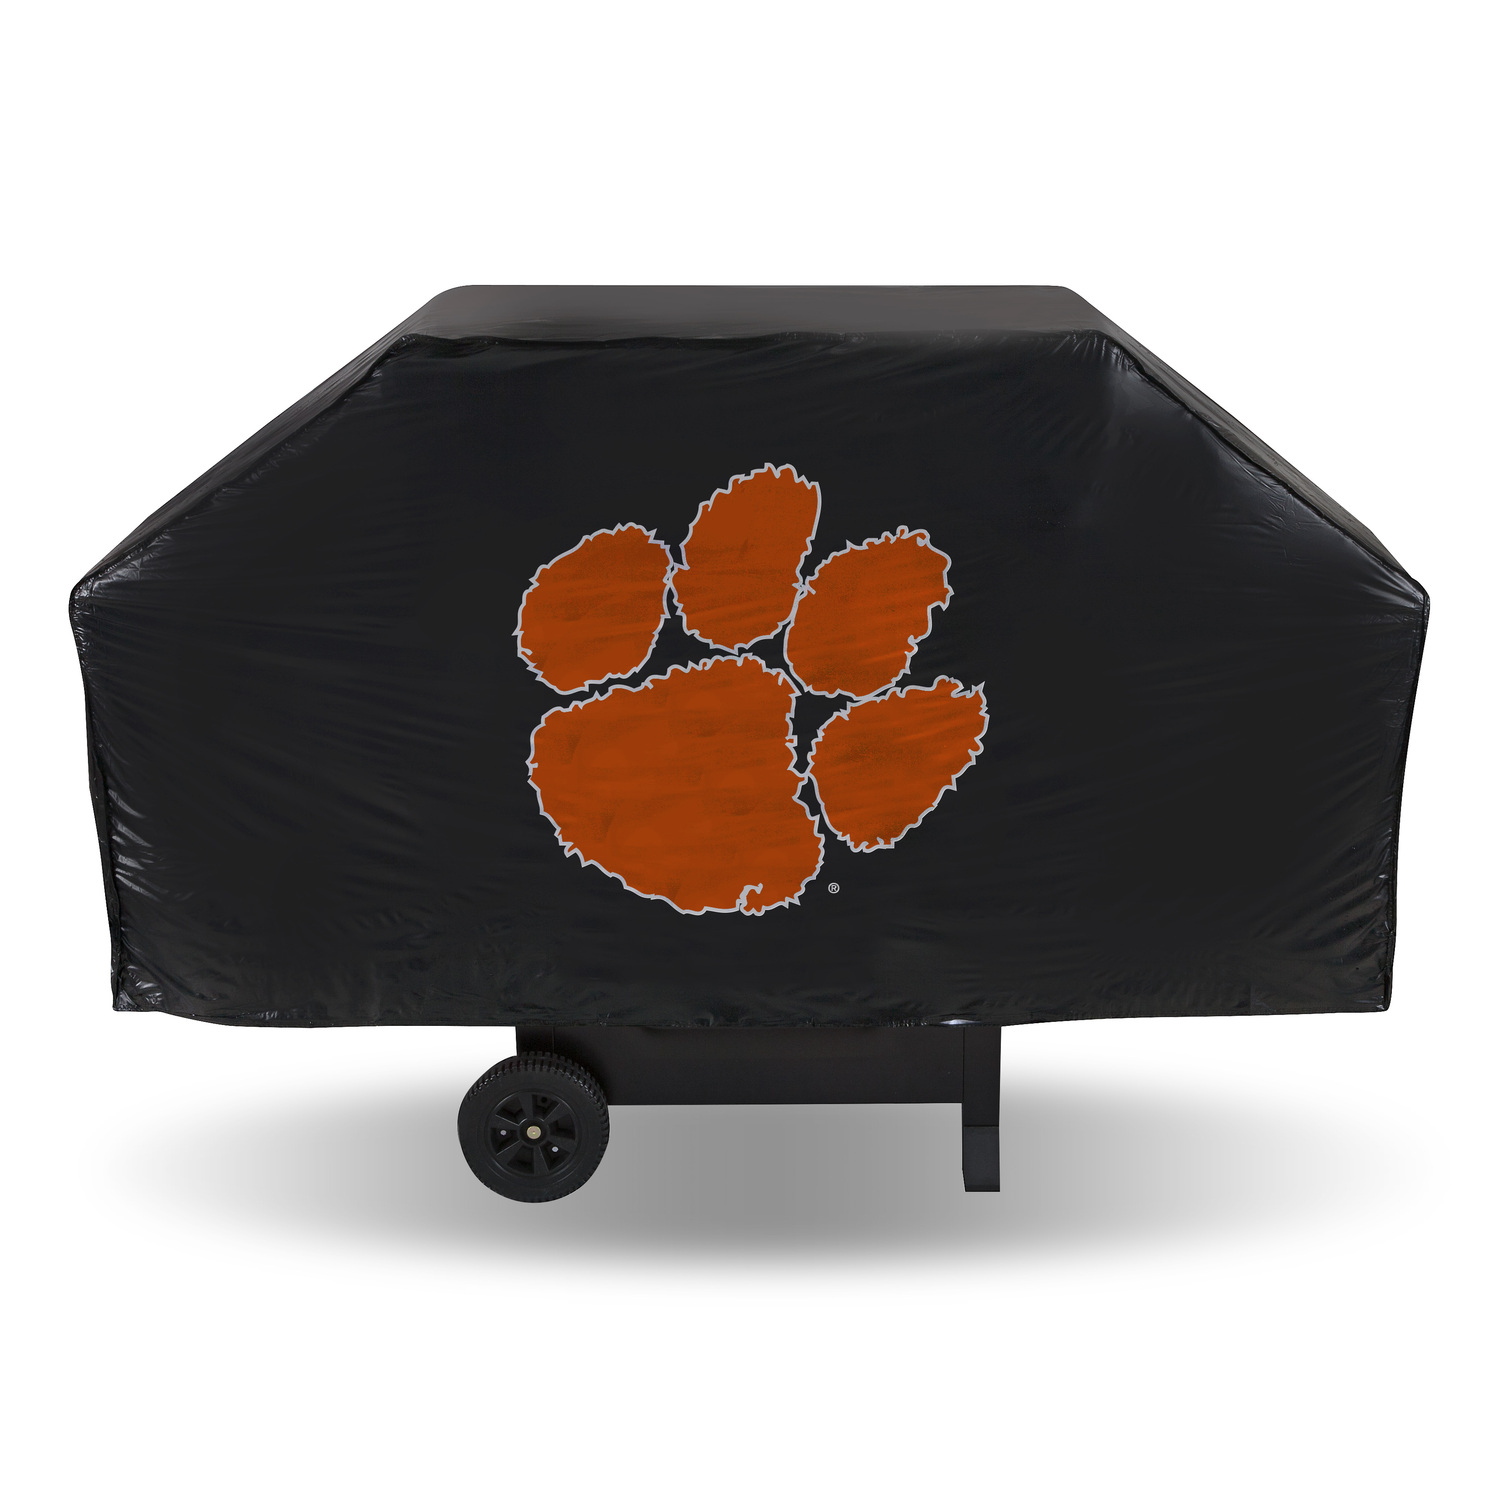 Rico Clemson Tigers Economy Vinyl Grill Cover - image 1 of 2